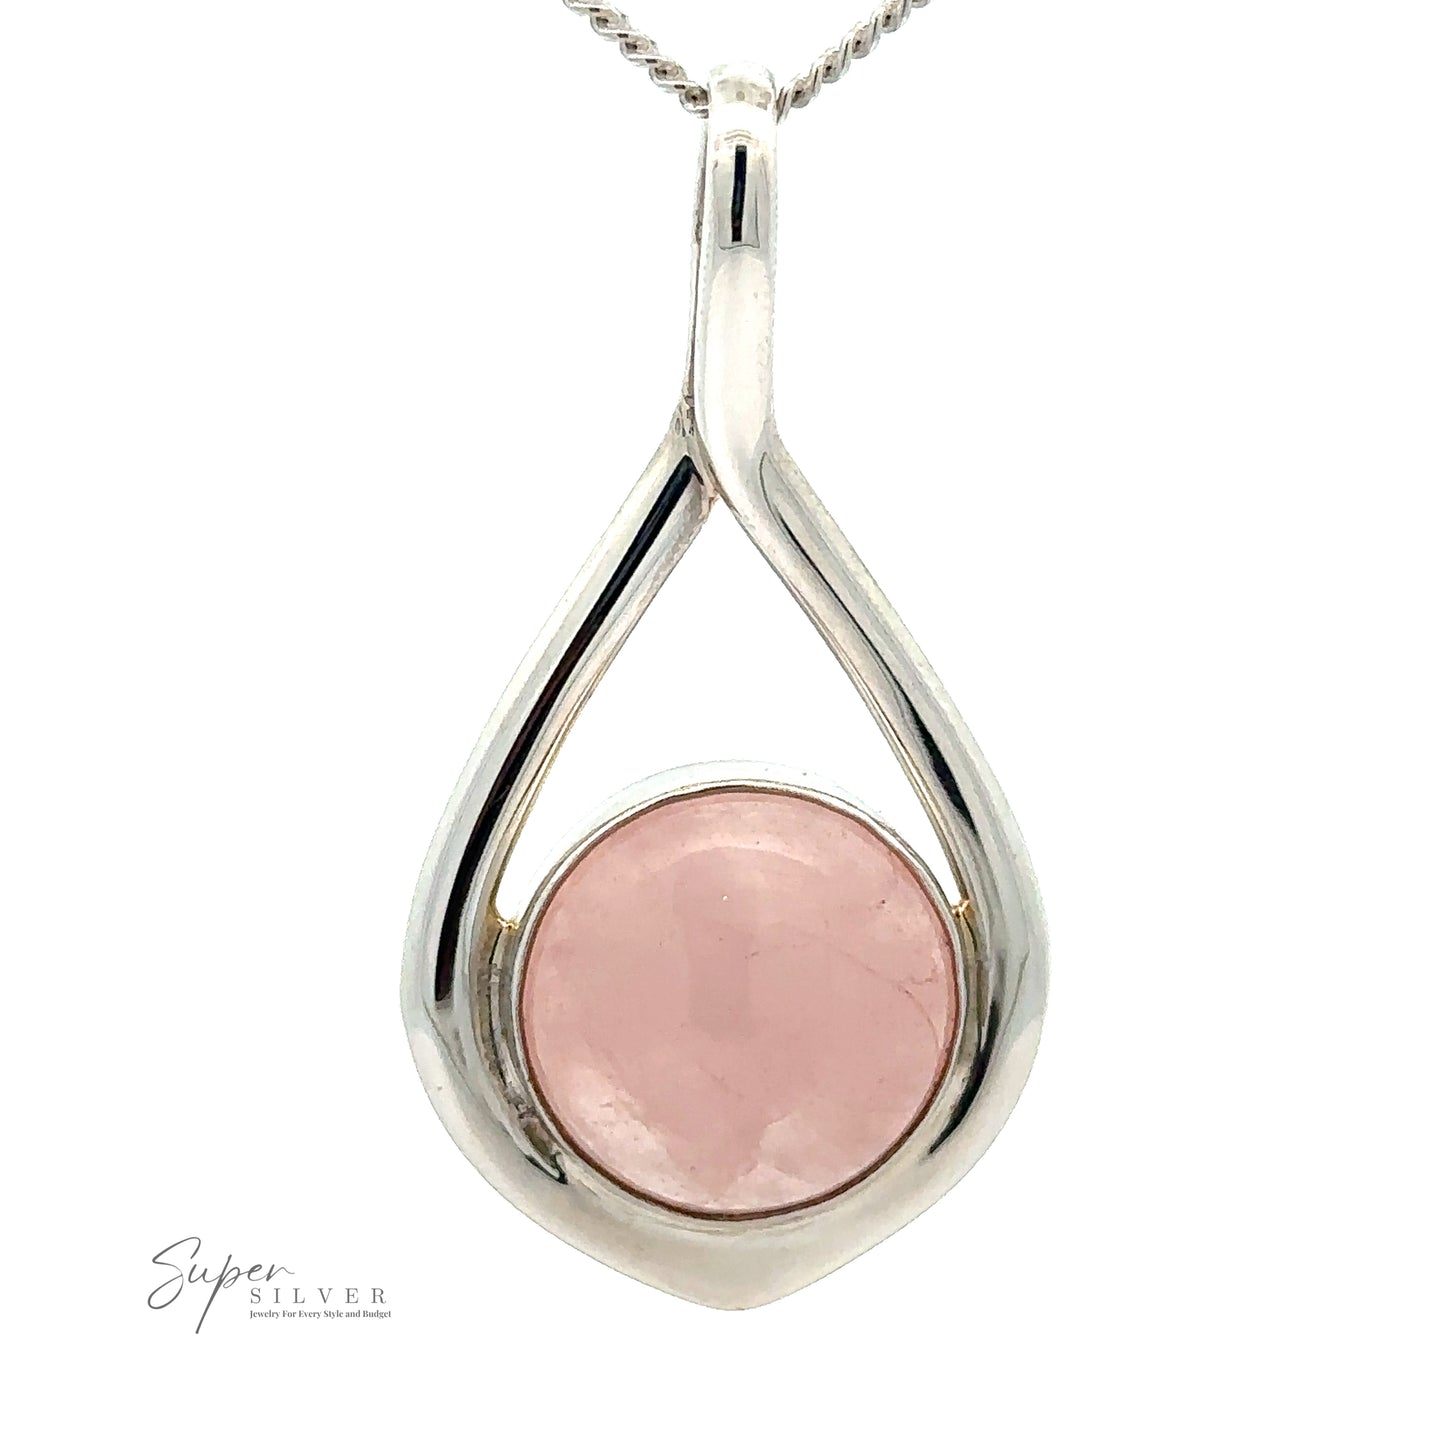 
                  
                    A Sterling Silver Pendant necklace featuring a light pink oval gemstone at its heart. The pendant boasts an open teardrop design, accentuating the Rose Quartz Teardrop Pendant's beauty, renowned for emotional healing. The Super Silver logo is visible in the corner.
                  
                